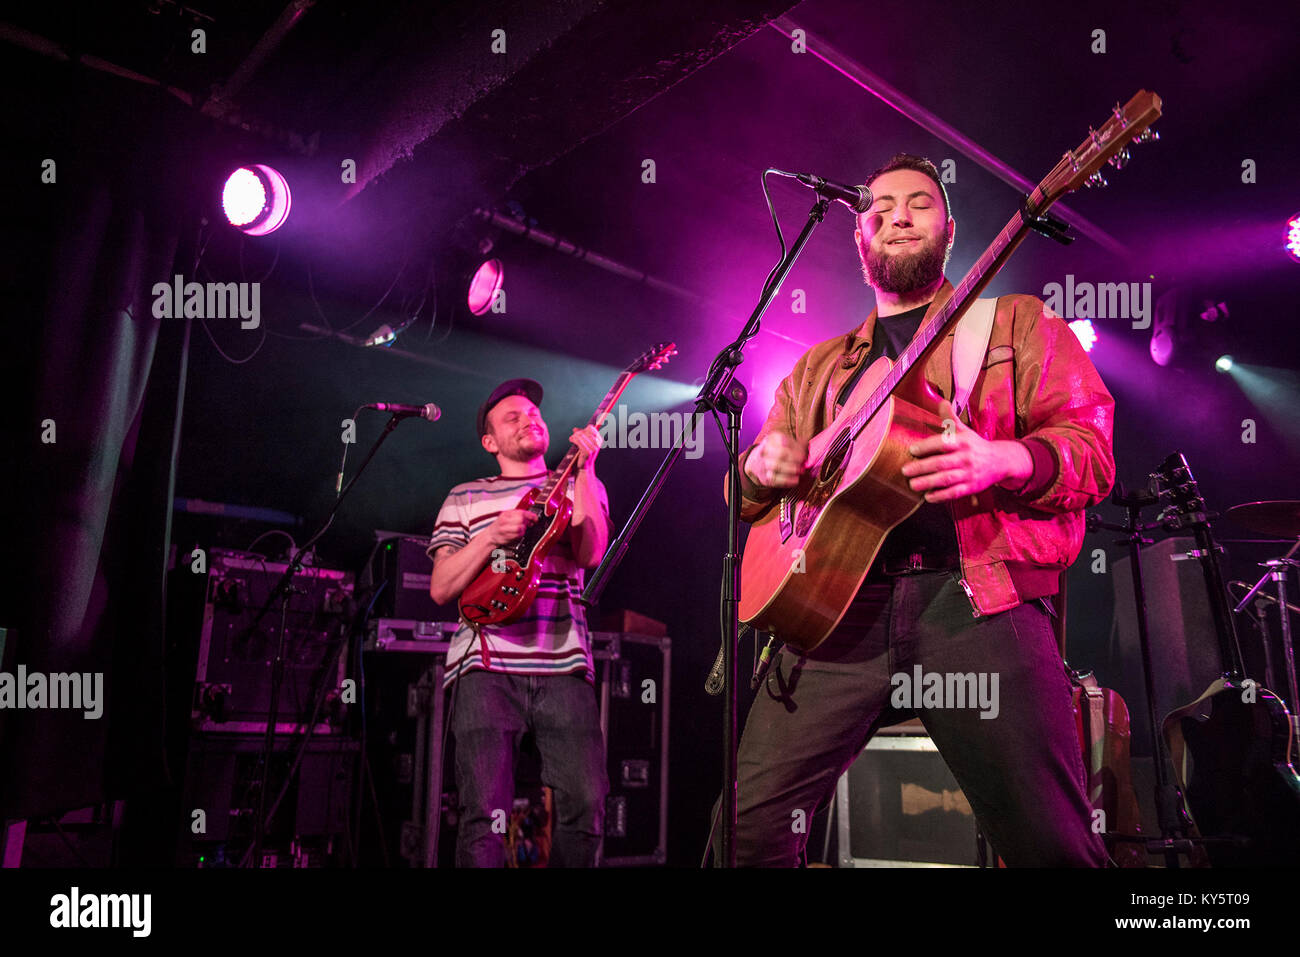 Manchester, UK. 13th January 2018. Ralph Pelleymounter,  James Ball,  Josh Taffel, Grant McNeill and Ben Jackson of To Kill A King perform at the Academy 3 in Manchester 13/01/2018 Credit: Gary Mather/Alamy Live News Stock Photo